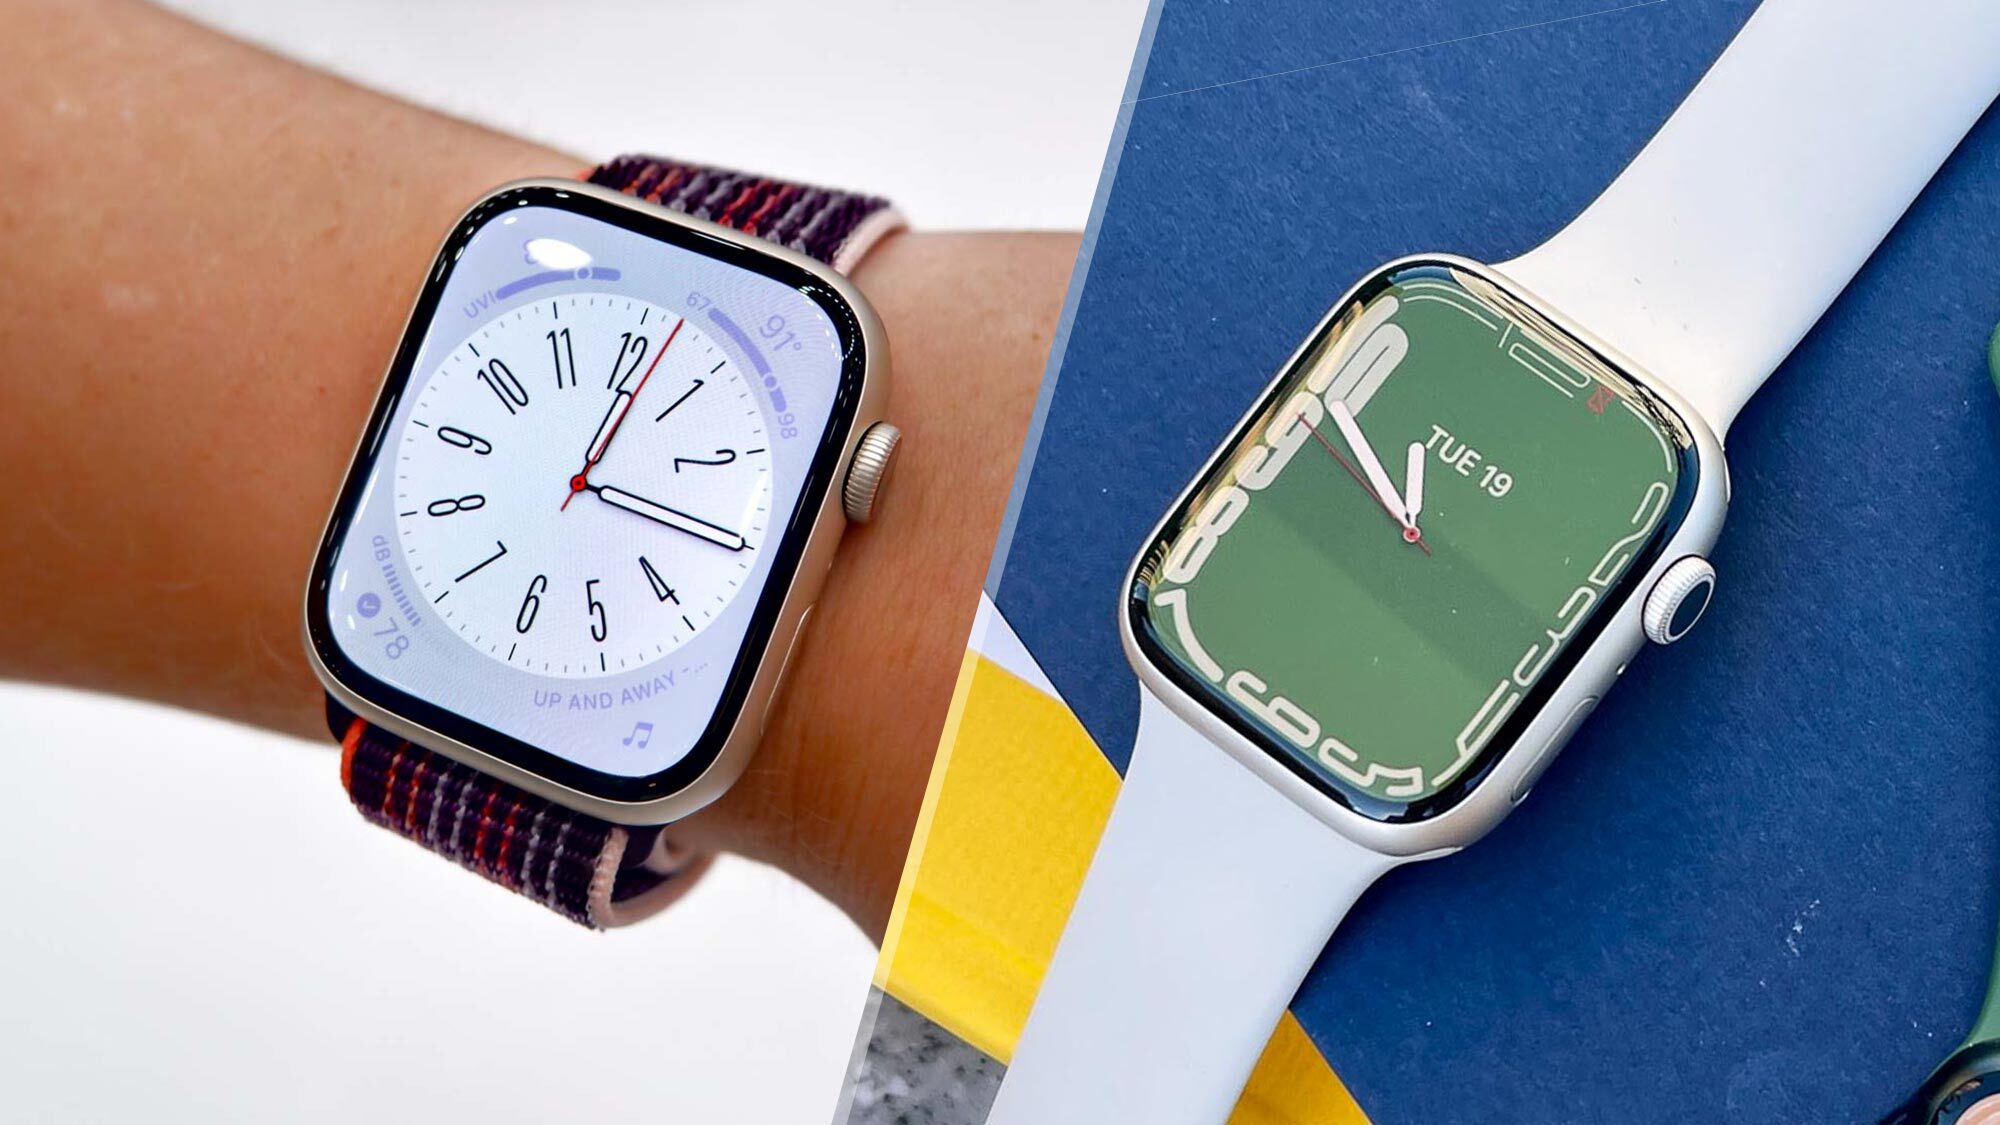 Apple Watch Series 8: Price, release date and new features